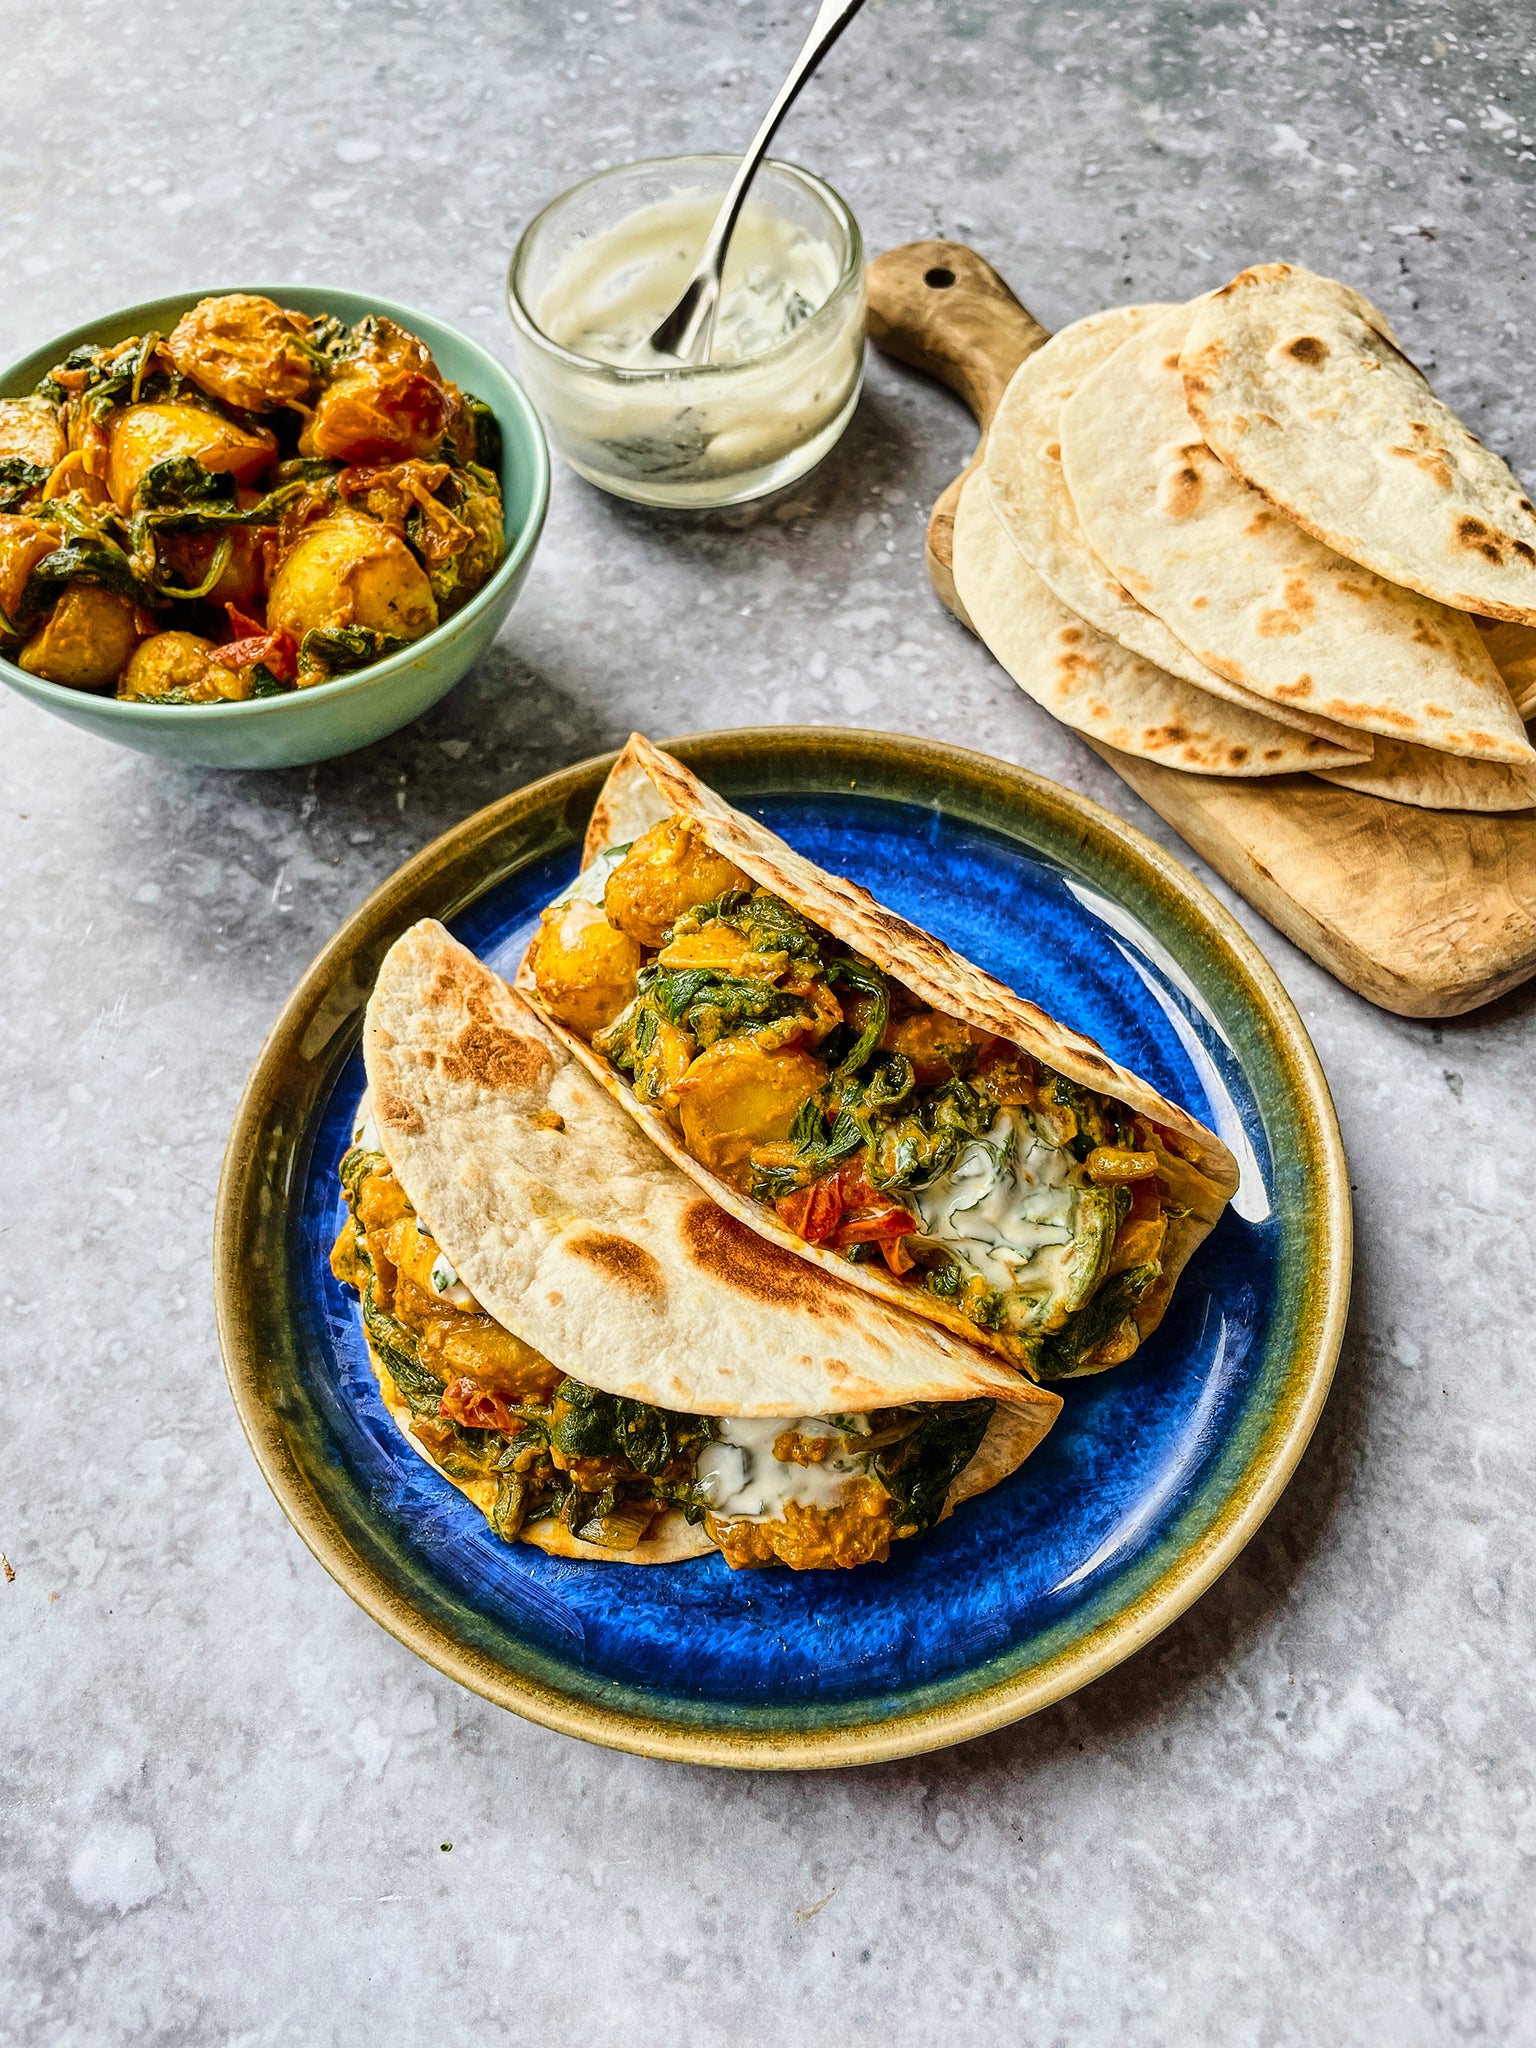 Bursting with the warming spices of cumin, turmeric and garam masala, the tacos are surprisingly simple to make